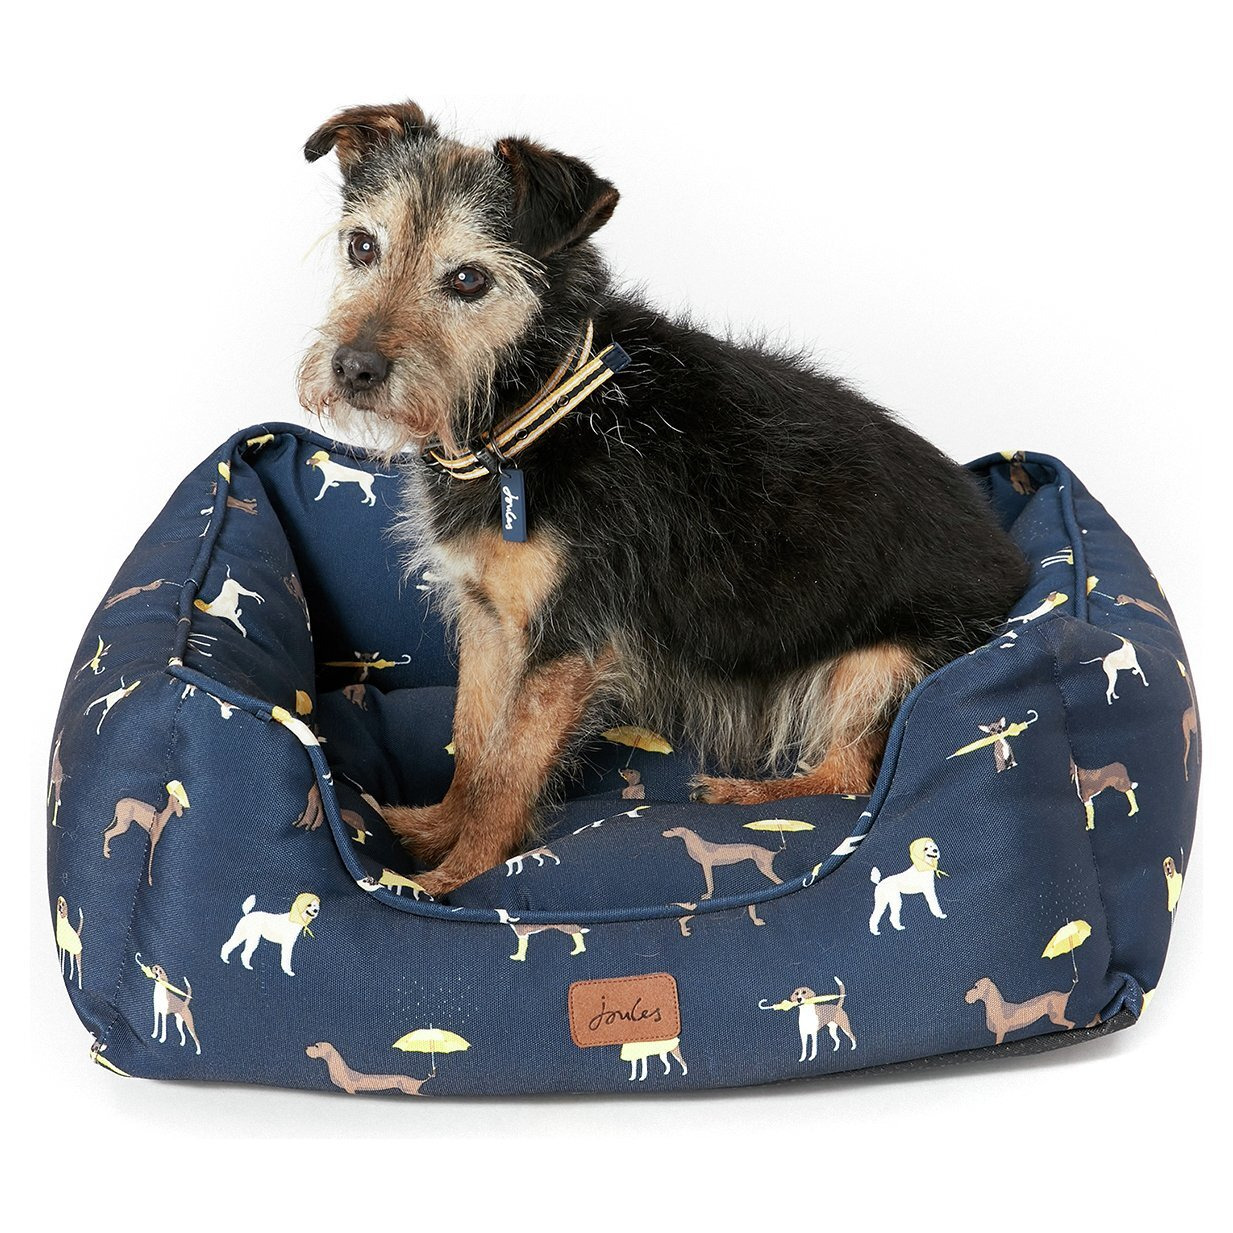 Joules Sleeping Dogs Print Box Dog Bed - Large - image 1